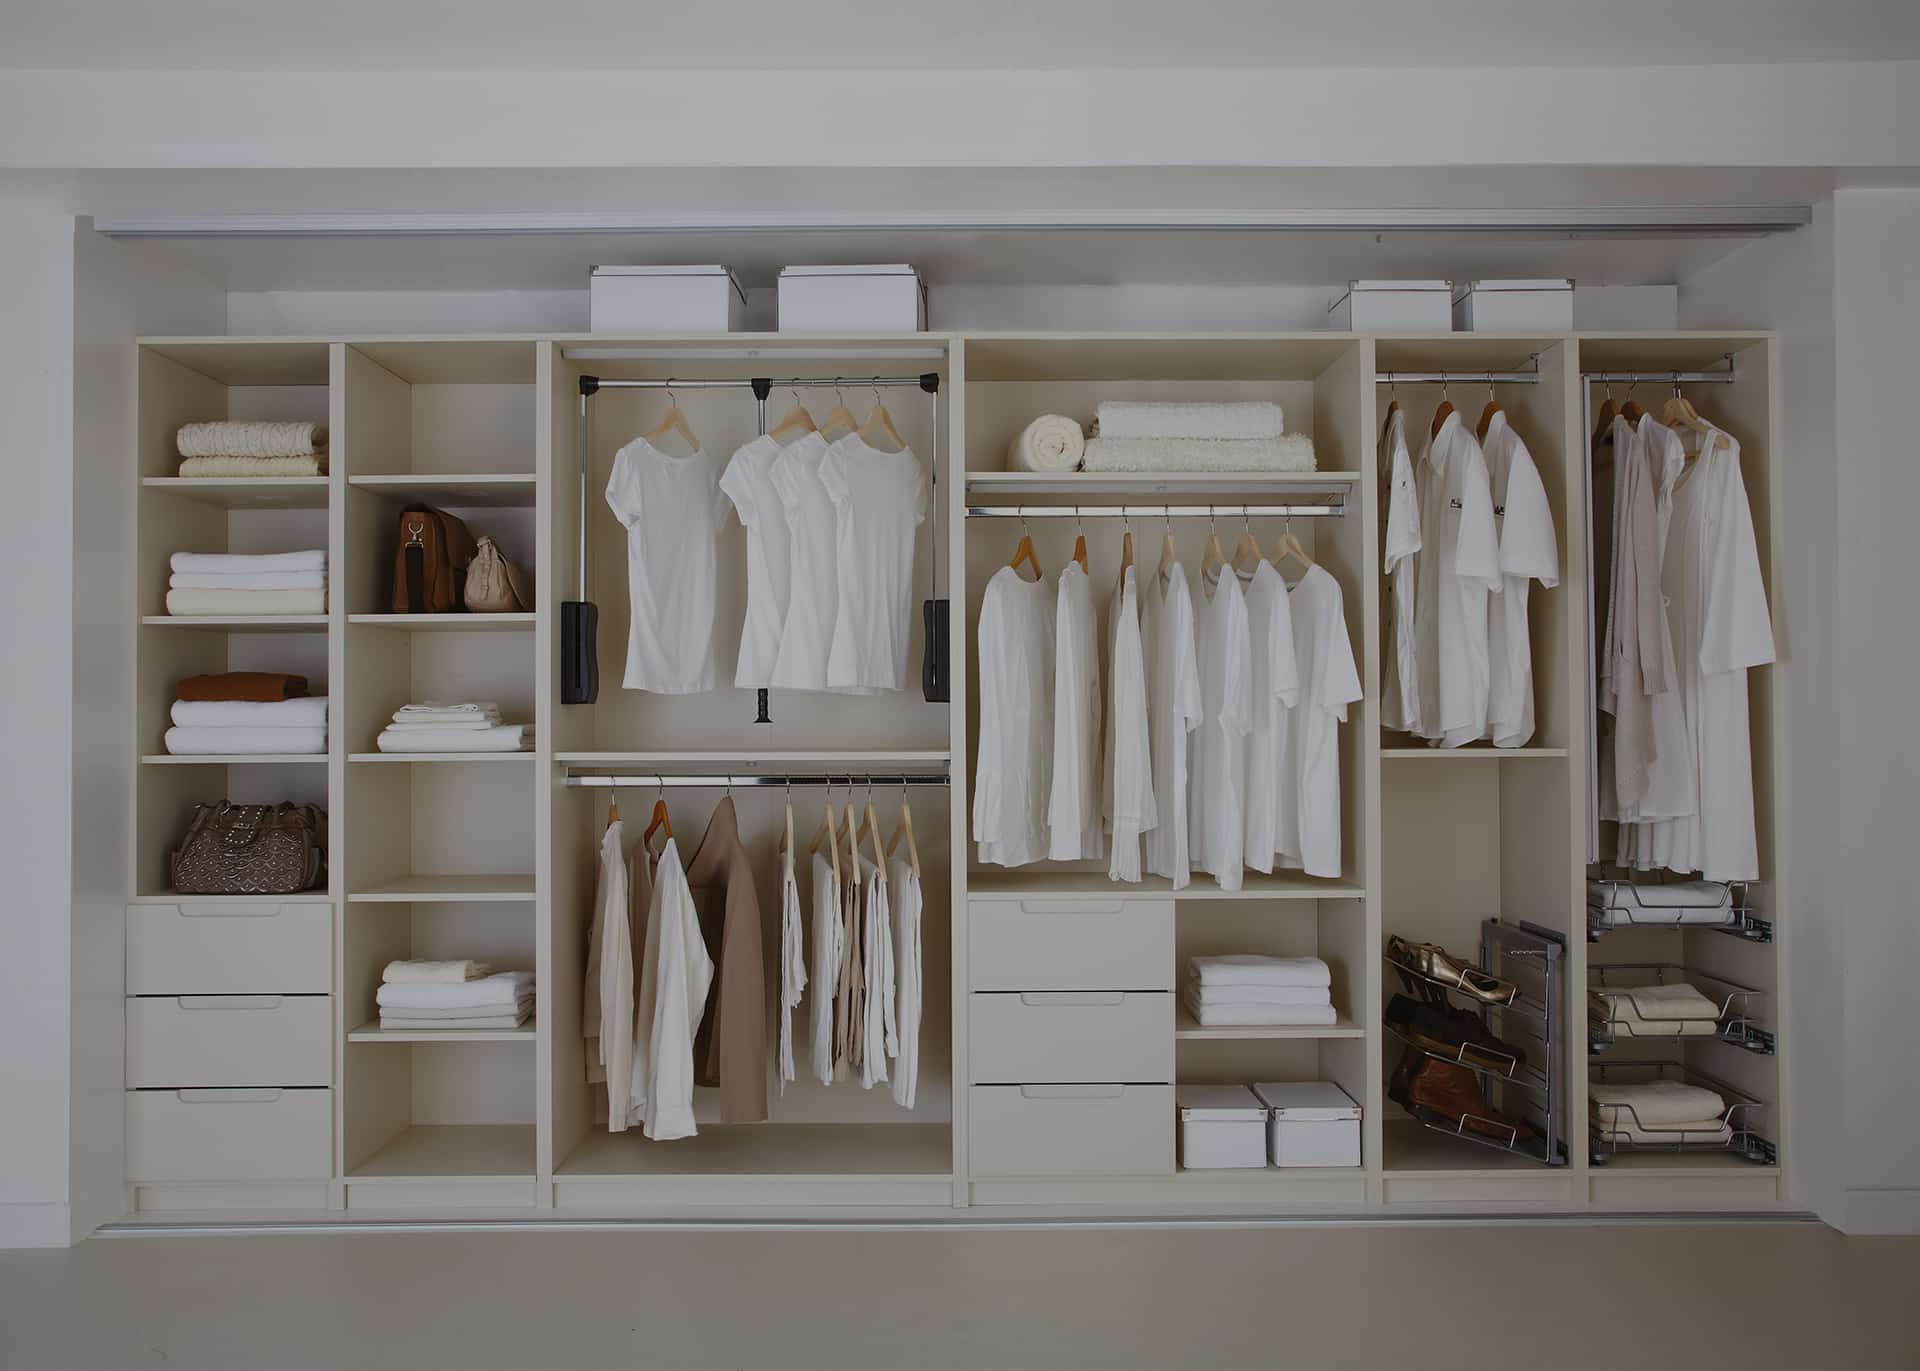 Fitted Wardrobes | Made To Measure Wardrobes | Glide And Slide Inside Built In Wardrobes (View 2 of 15)